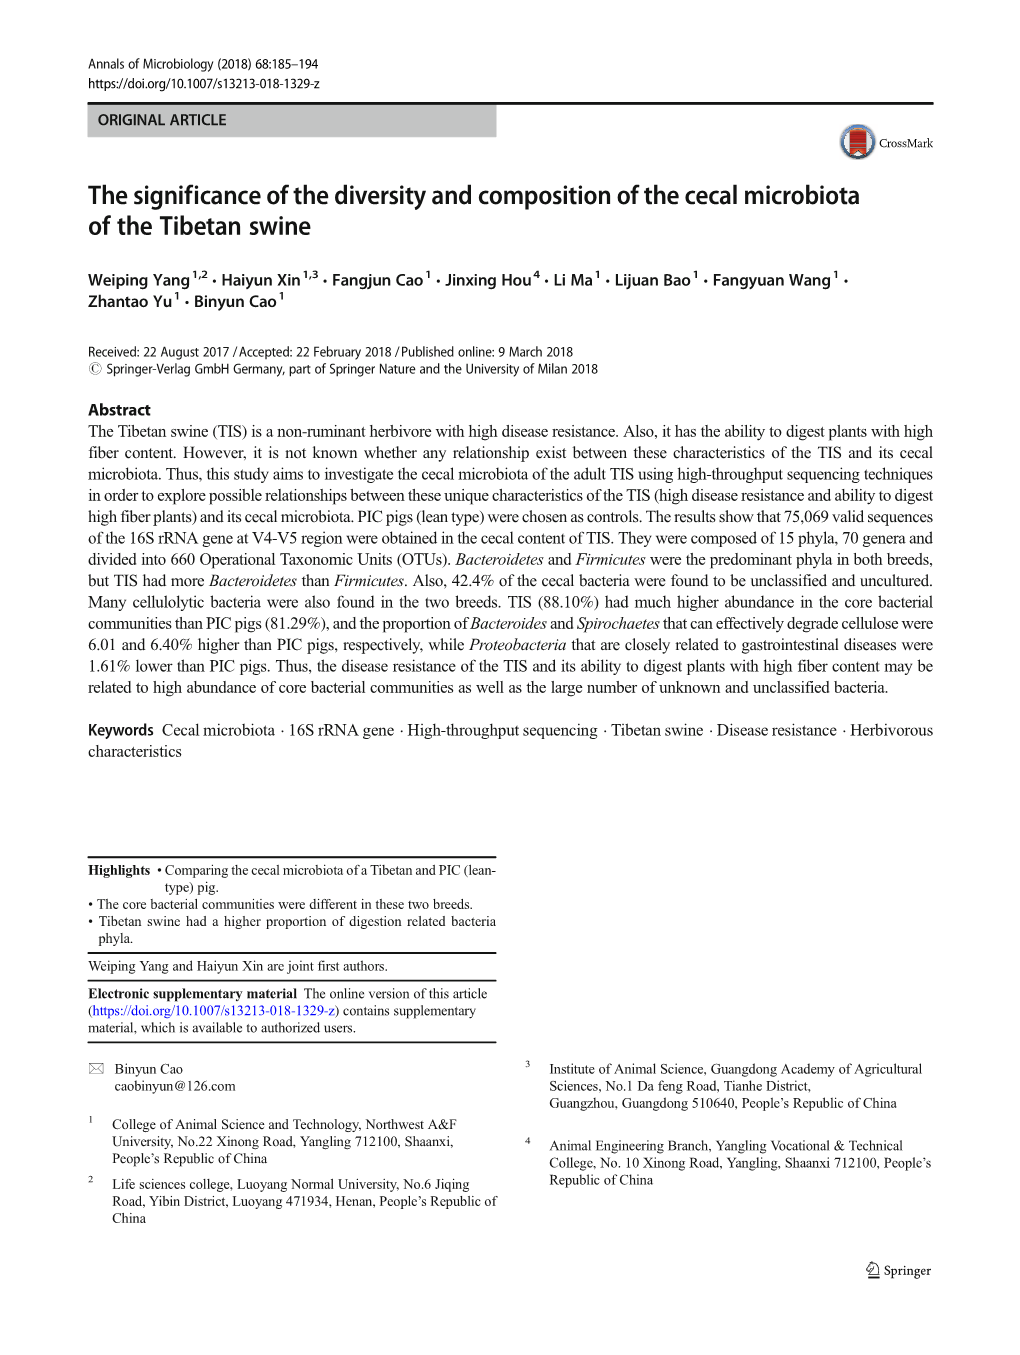 The Significance of the Diversity and Composition of the Cecal Microbiota of the Tibetan Swine